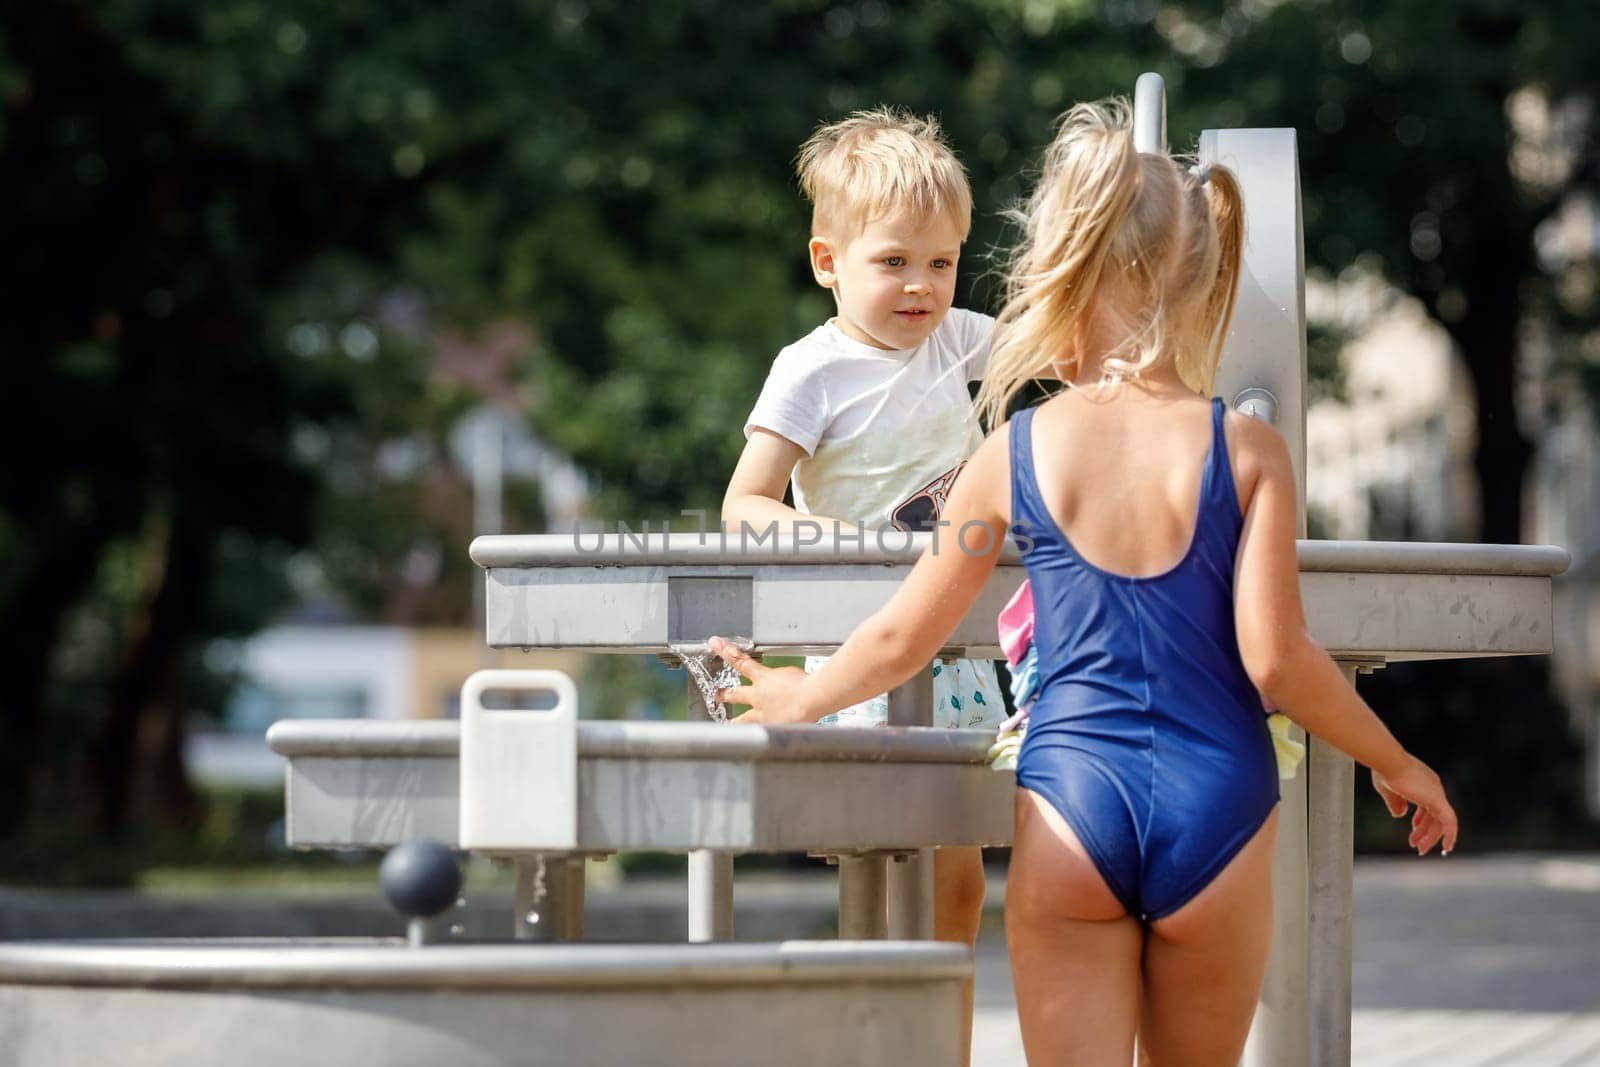 A happy little boy and nice girl in a blue swimsuit plays with a water tap in a city park. Special water equipment for children's games on a hot summer day outdoors. Horizontal photo by Lincikas